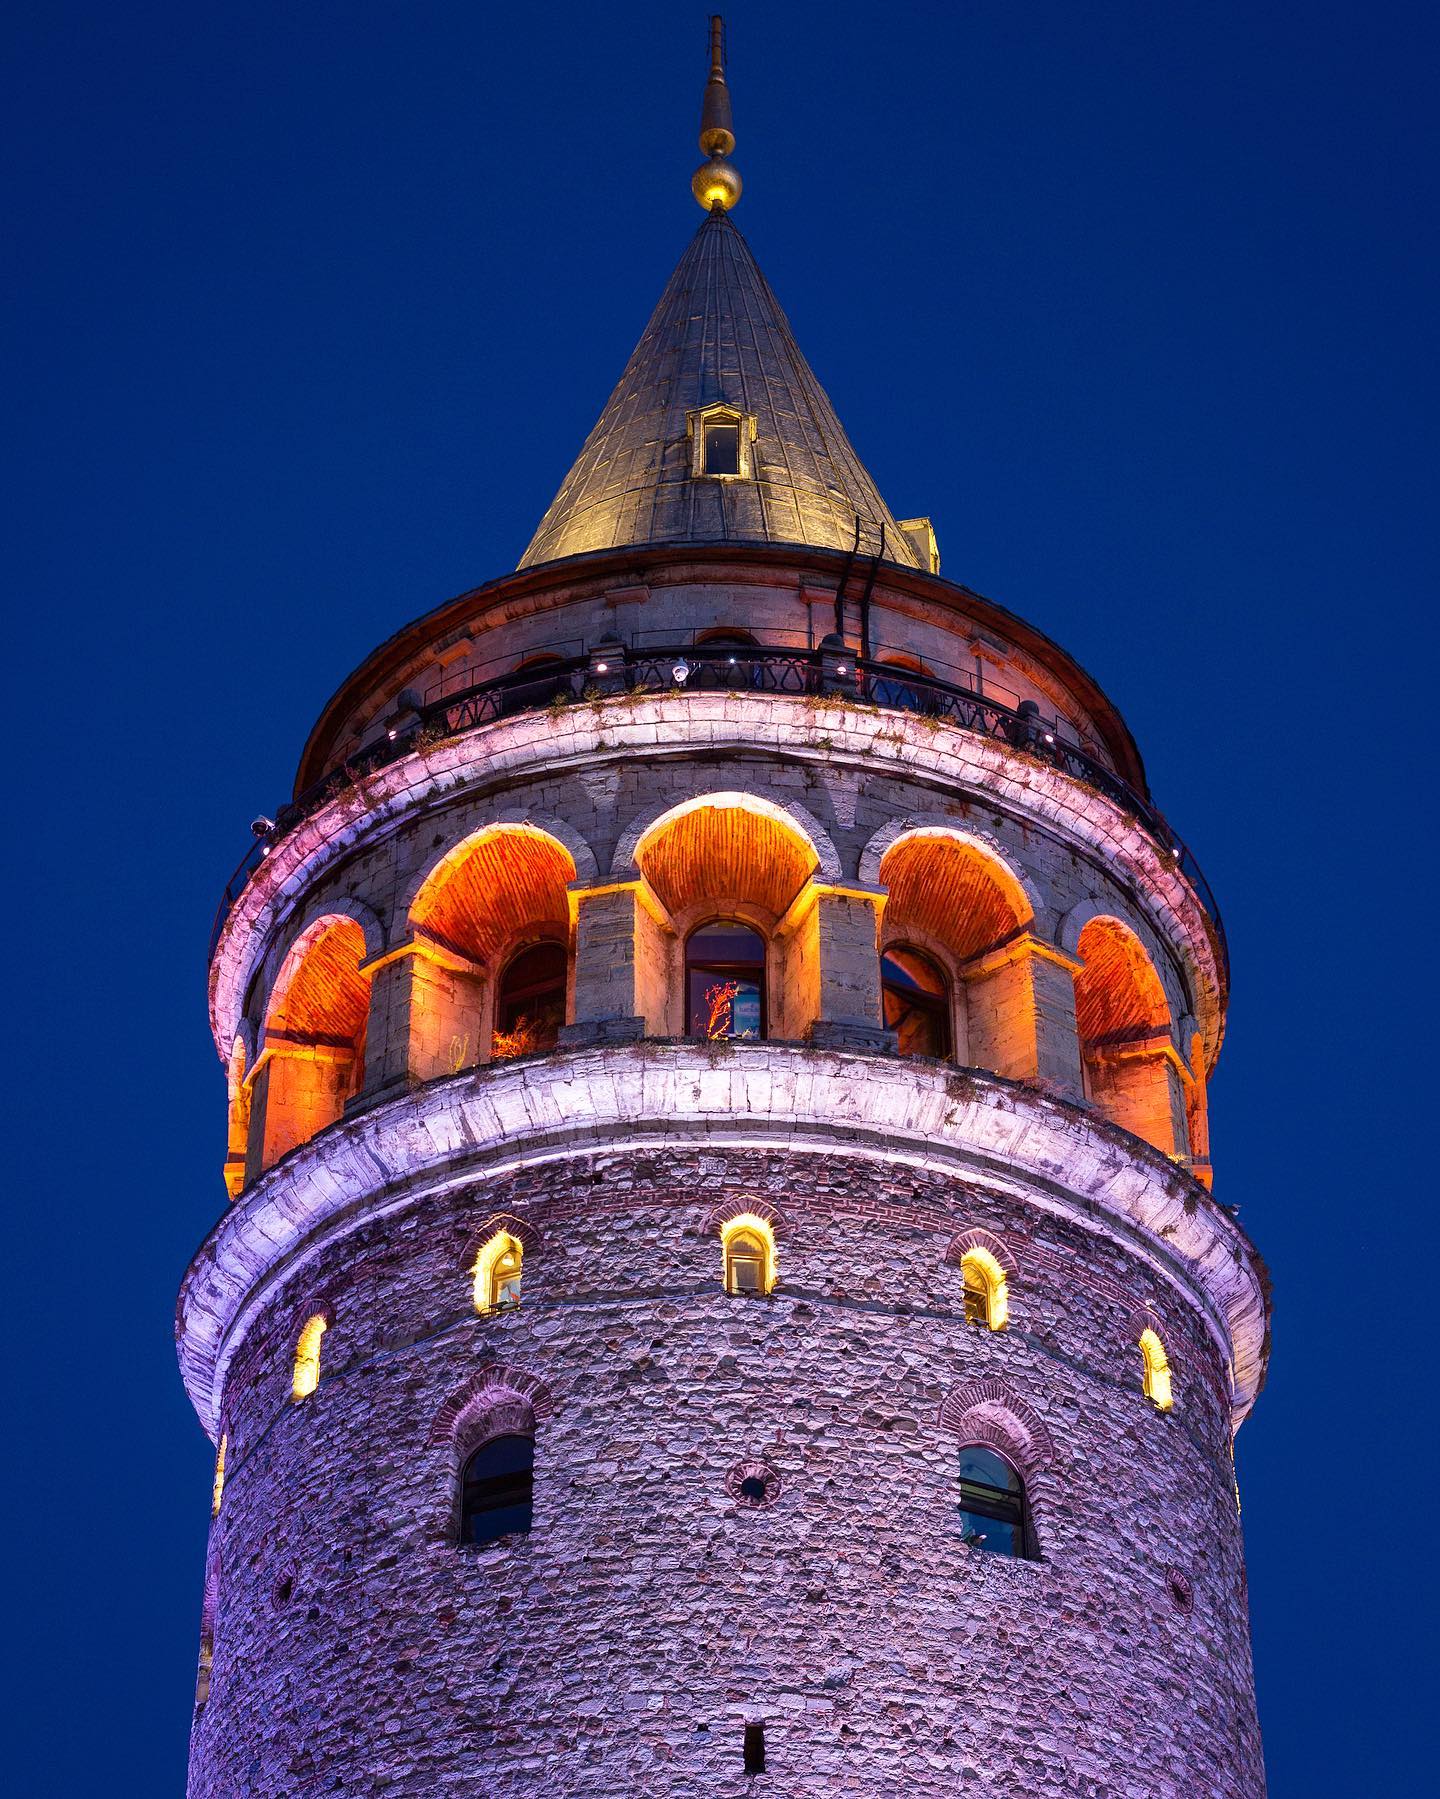 The Galata Tower is one of the symbols of Istanbul and it is situated in Galata, on a hill seeing the historical peninsula of Istanbul from A-Z. The origin of the Galata Tower goes back to the fifth century CE, when Byzantines built a wooden tower named Magalos Pyrgos (Great Tower) in order to control the city of Constantinople and Golden Horn. Due to the fires, earthquakes, and the Sack of Constantinople by the Fourth Crusaders in 1204 the wooden tower was completely destroyed.
.
.
#istanbul #turkey #türkiye #galata #galatatower #beyoglu #constantinople #tower #sight #sightseeing #long_exposure #night #istanbulturkey #wonderful_places #beautifulplaces #canon #instagram #travel #traveler #europe #europetravel #europe_pics #traveling #travelblog #travelblogger #turkiye #istanbulbestpictures #bluehour #nightphotos #nightphotograpy